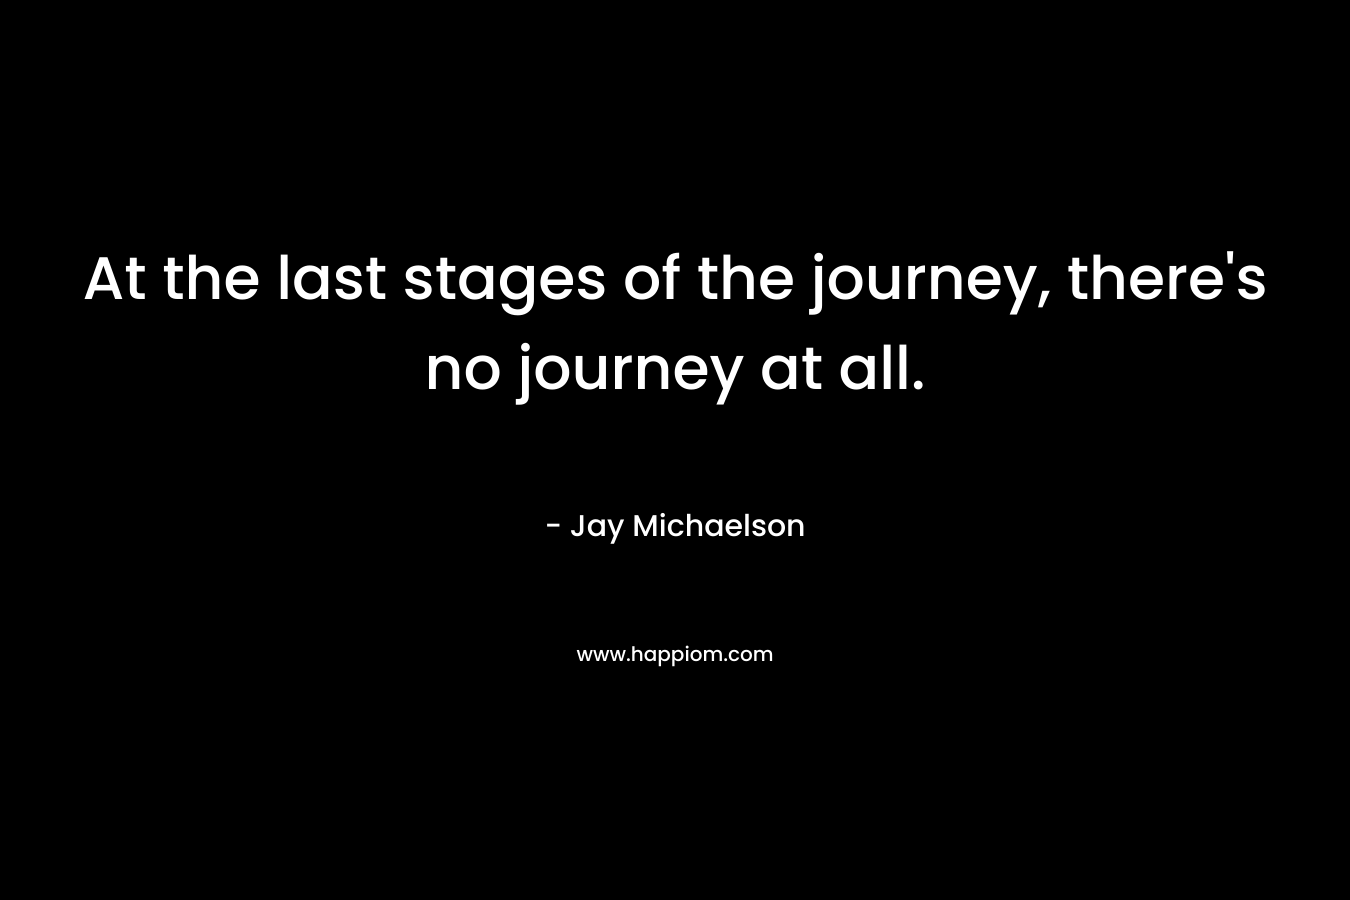 At the last stages of the journey, there's no journey at all.